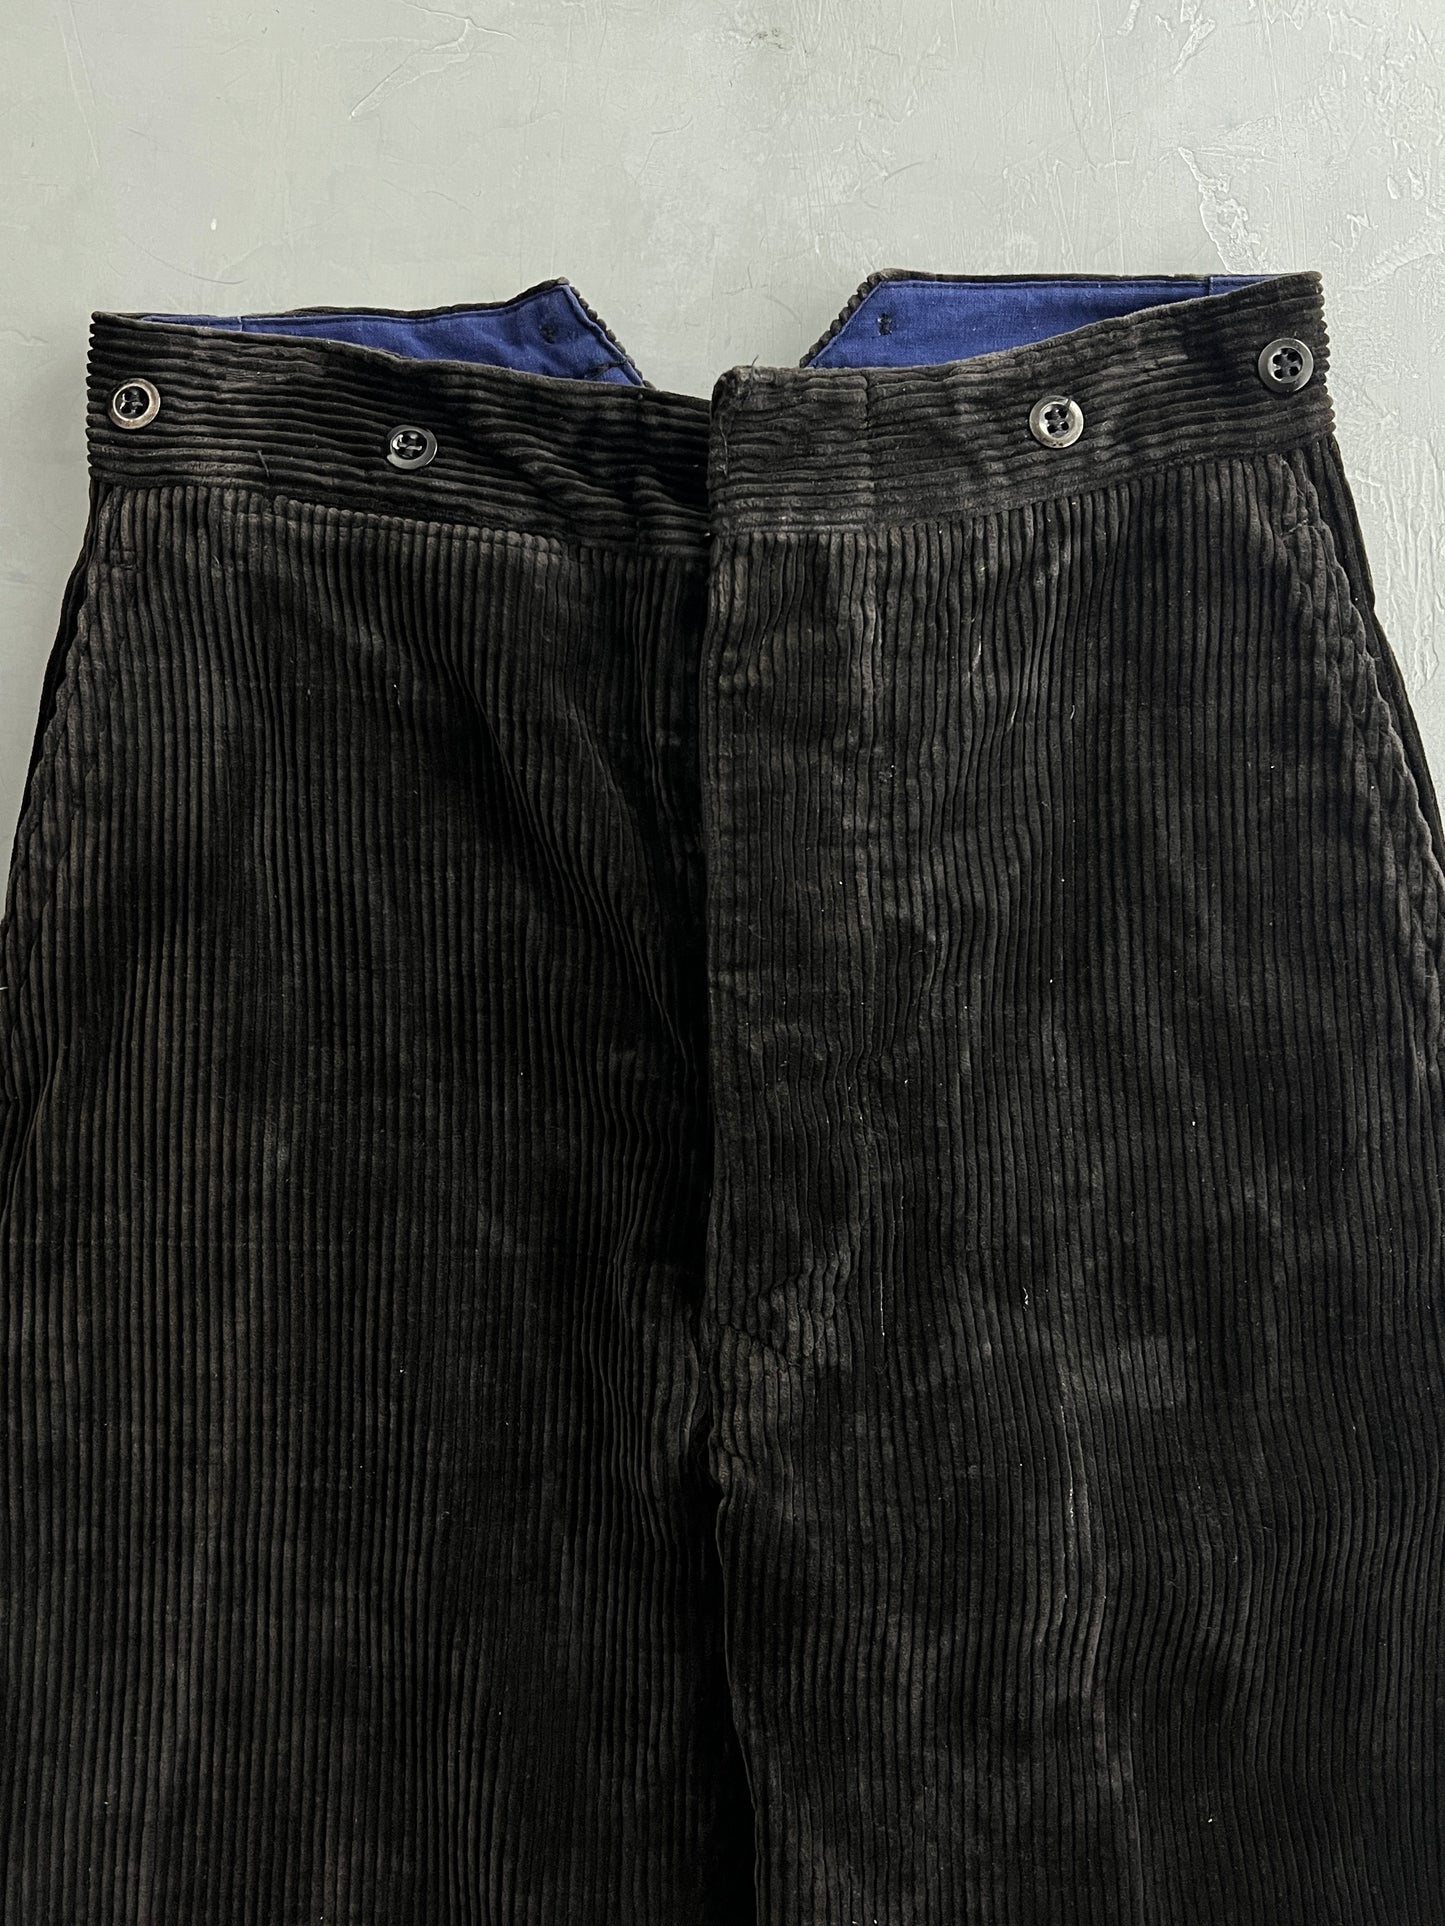 40's Deadstock French Buckle Back Cord Pants [32"]